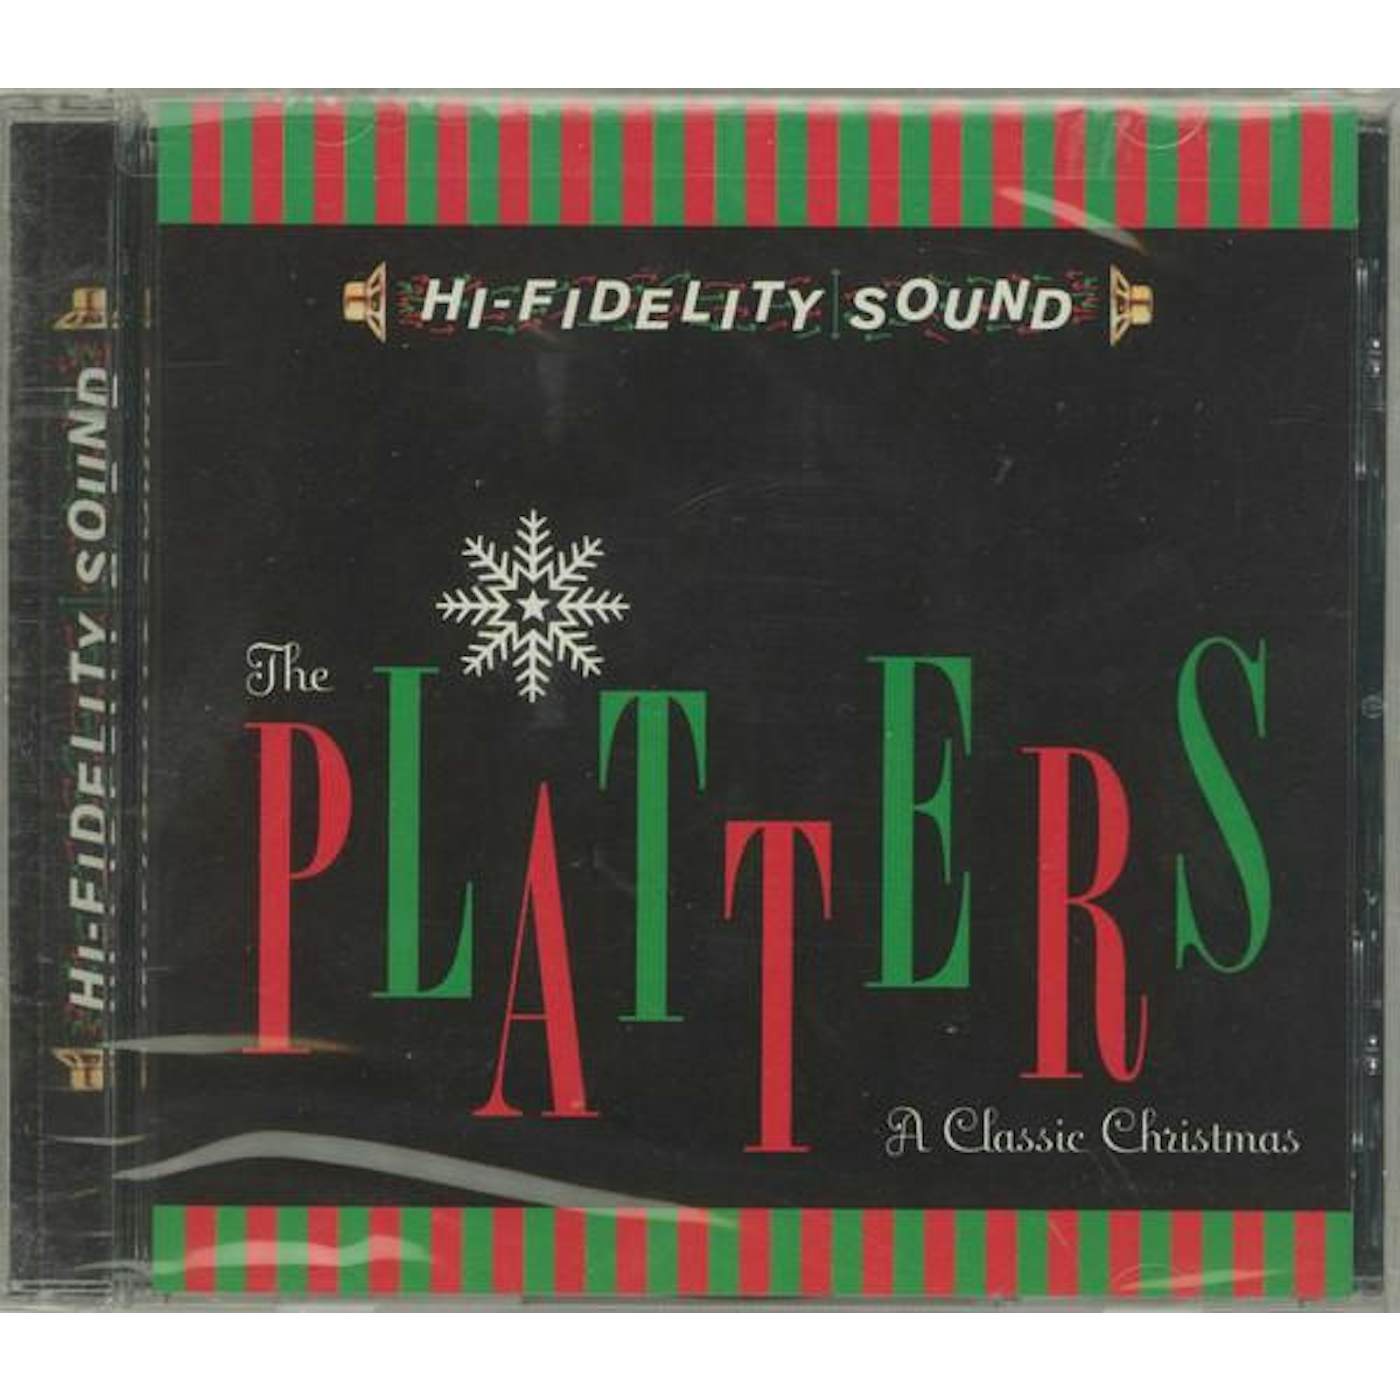 The Platters CLASSIC CHRISTMAS CD